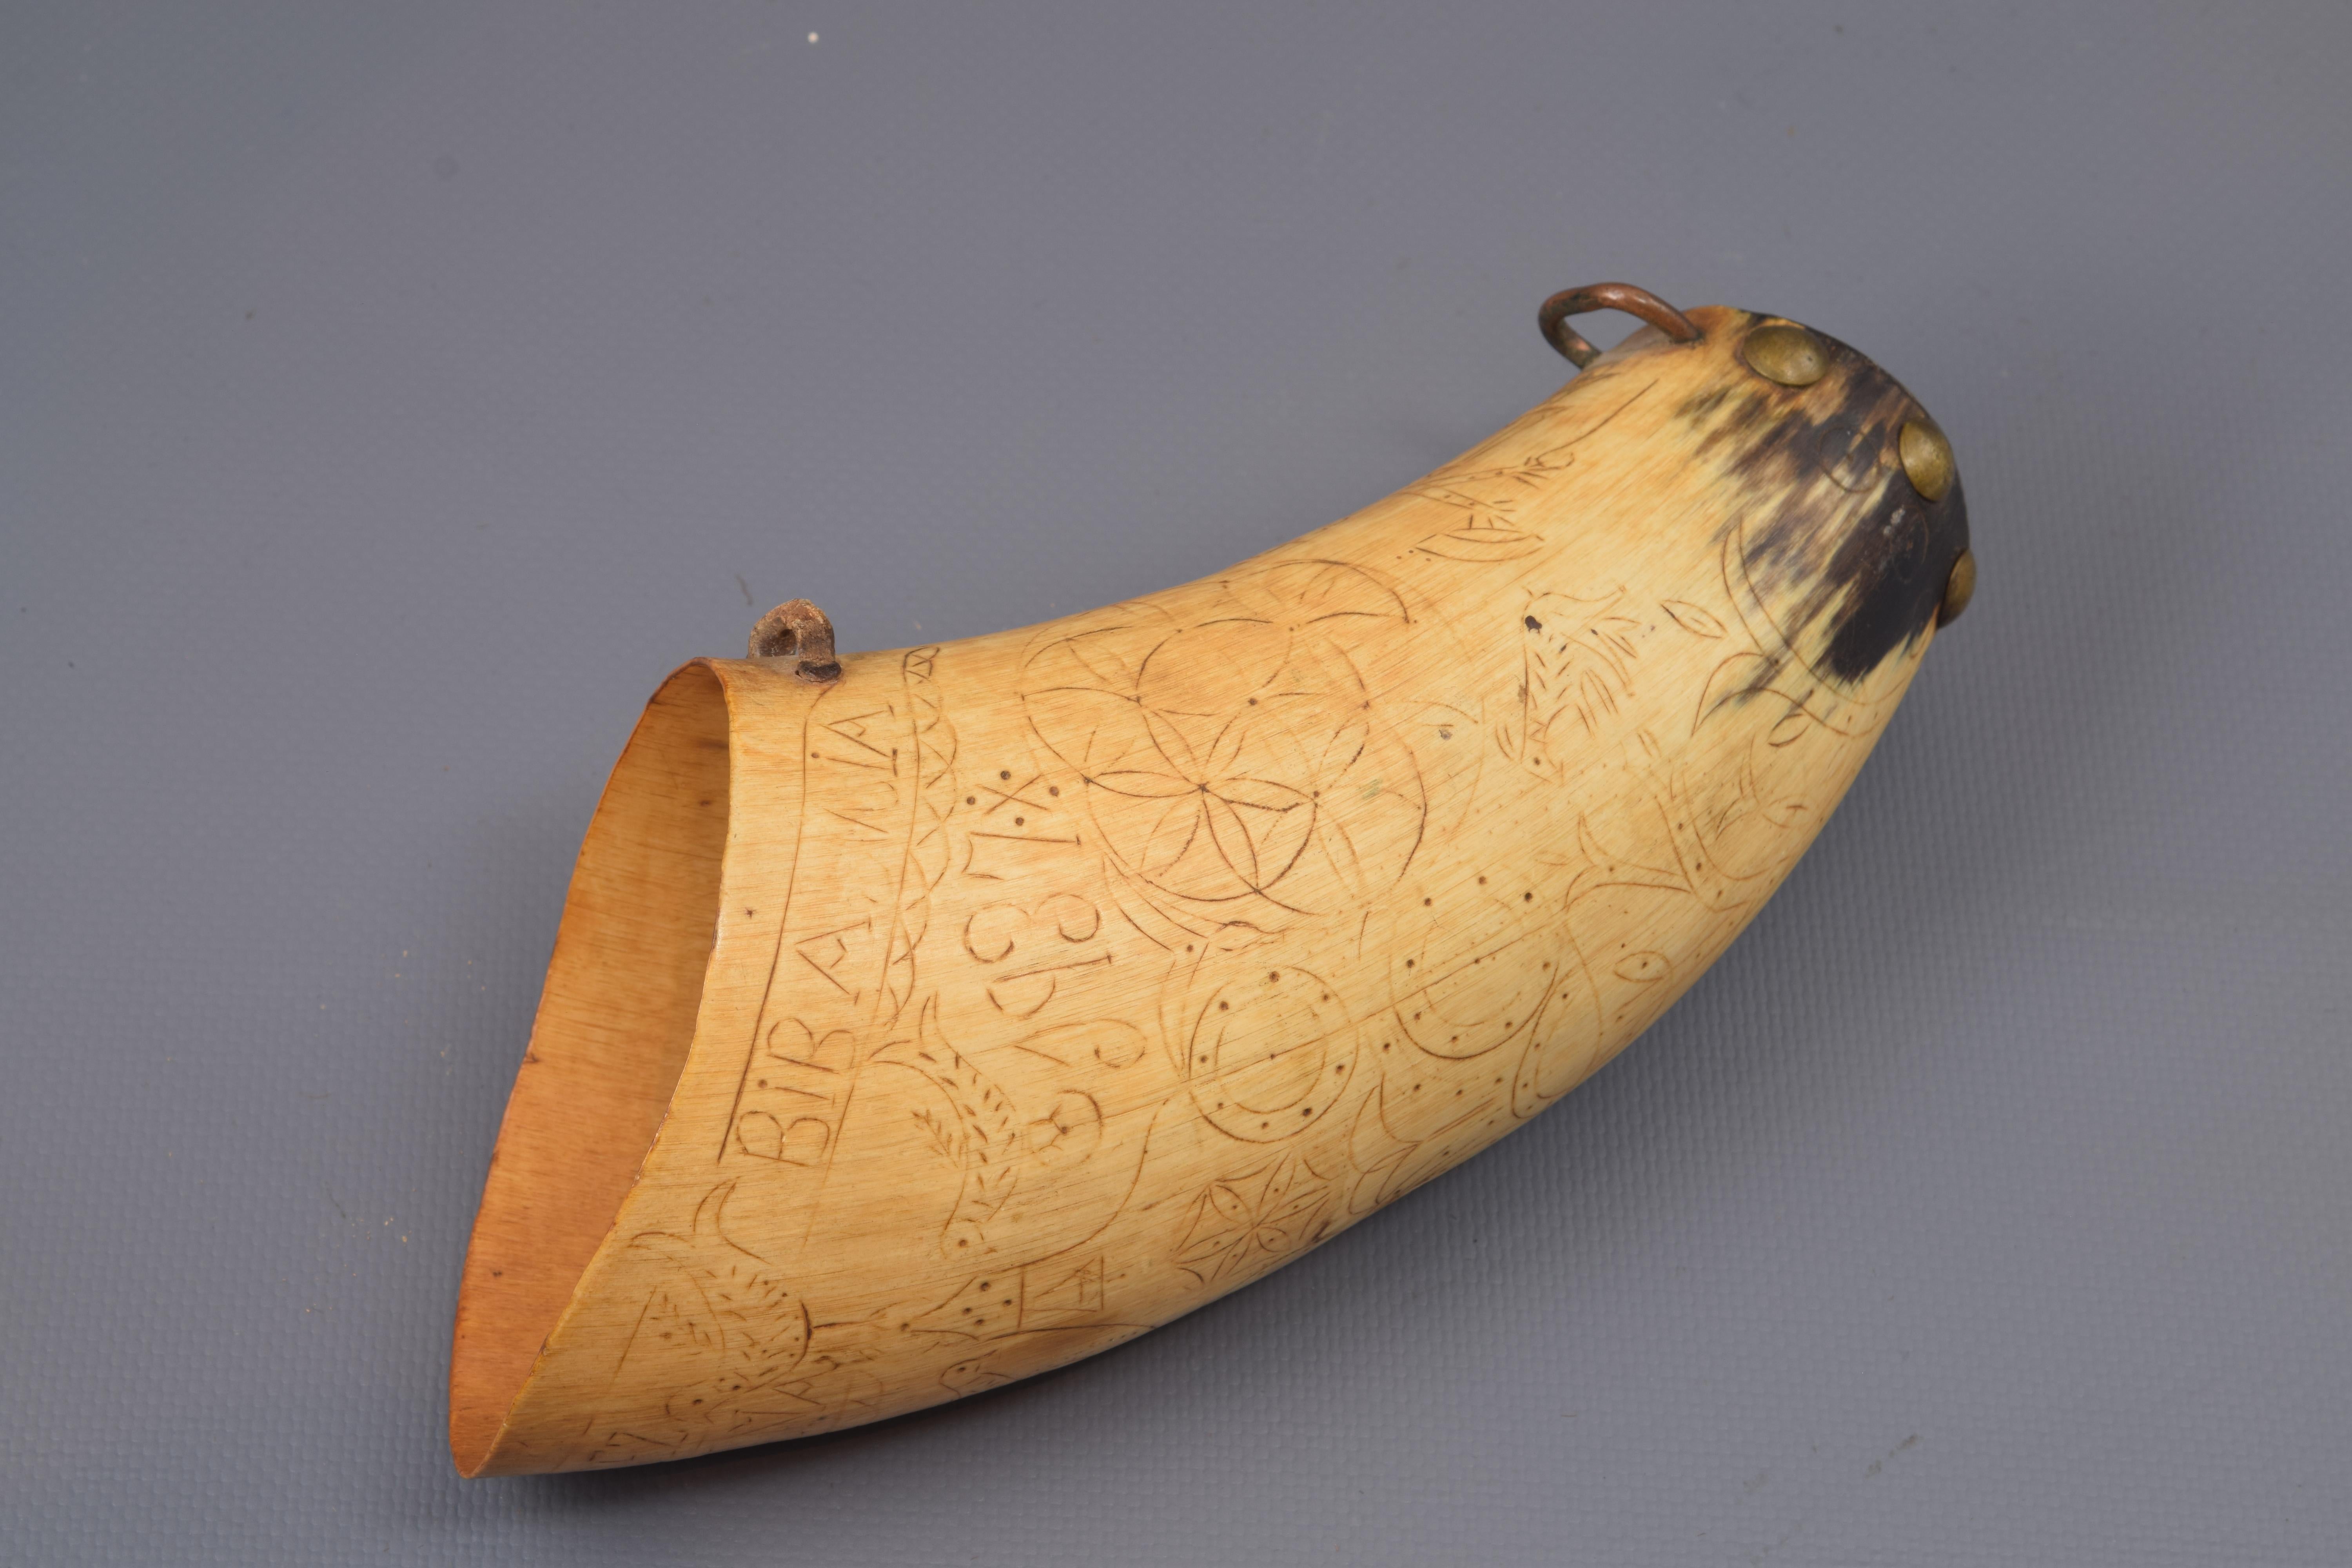 Dusting carved horn, metal. With registration and date. Spain, 1937.
Container to store gunpowder formed from an animal horn (very possibly cattle) to which the tip has been cut and covered this area (with metal tacks), and equipped with some